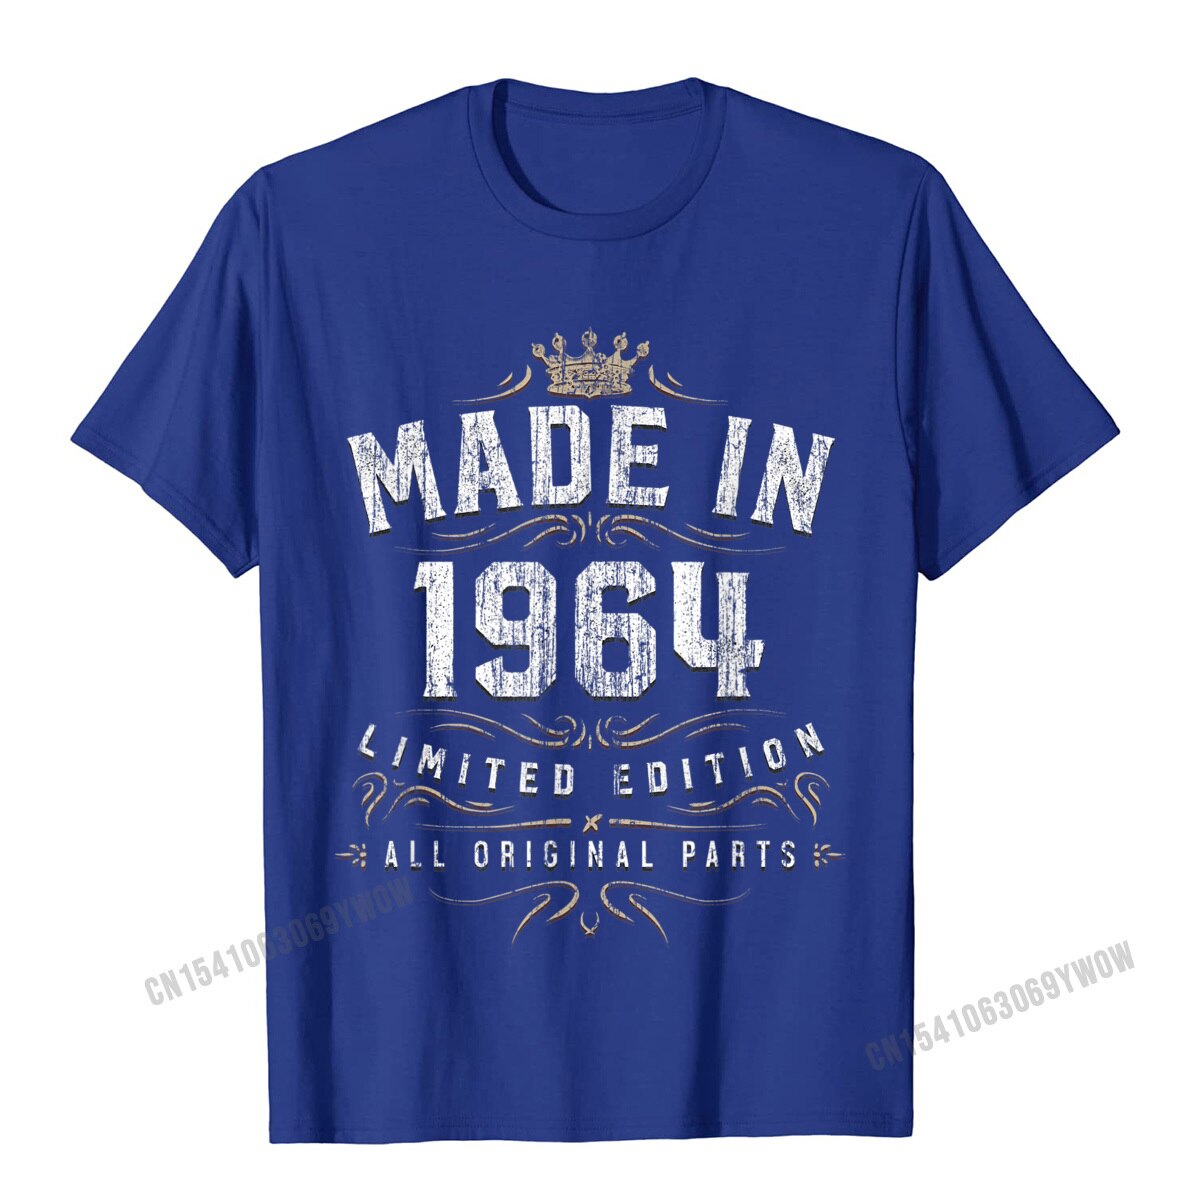 Camisa Family T Shirt for Men Cotton Fabric Father Day Tops Shirt Simple Style Tops & Tees Short Sleeve Prevalent Round Collar Made In 1964 Shirt Birthday 55 Limited Edition Image Gifts__994 blue